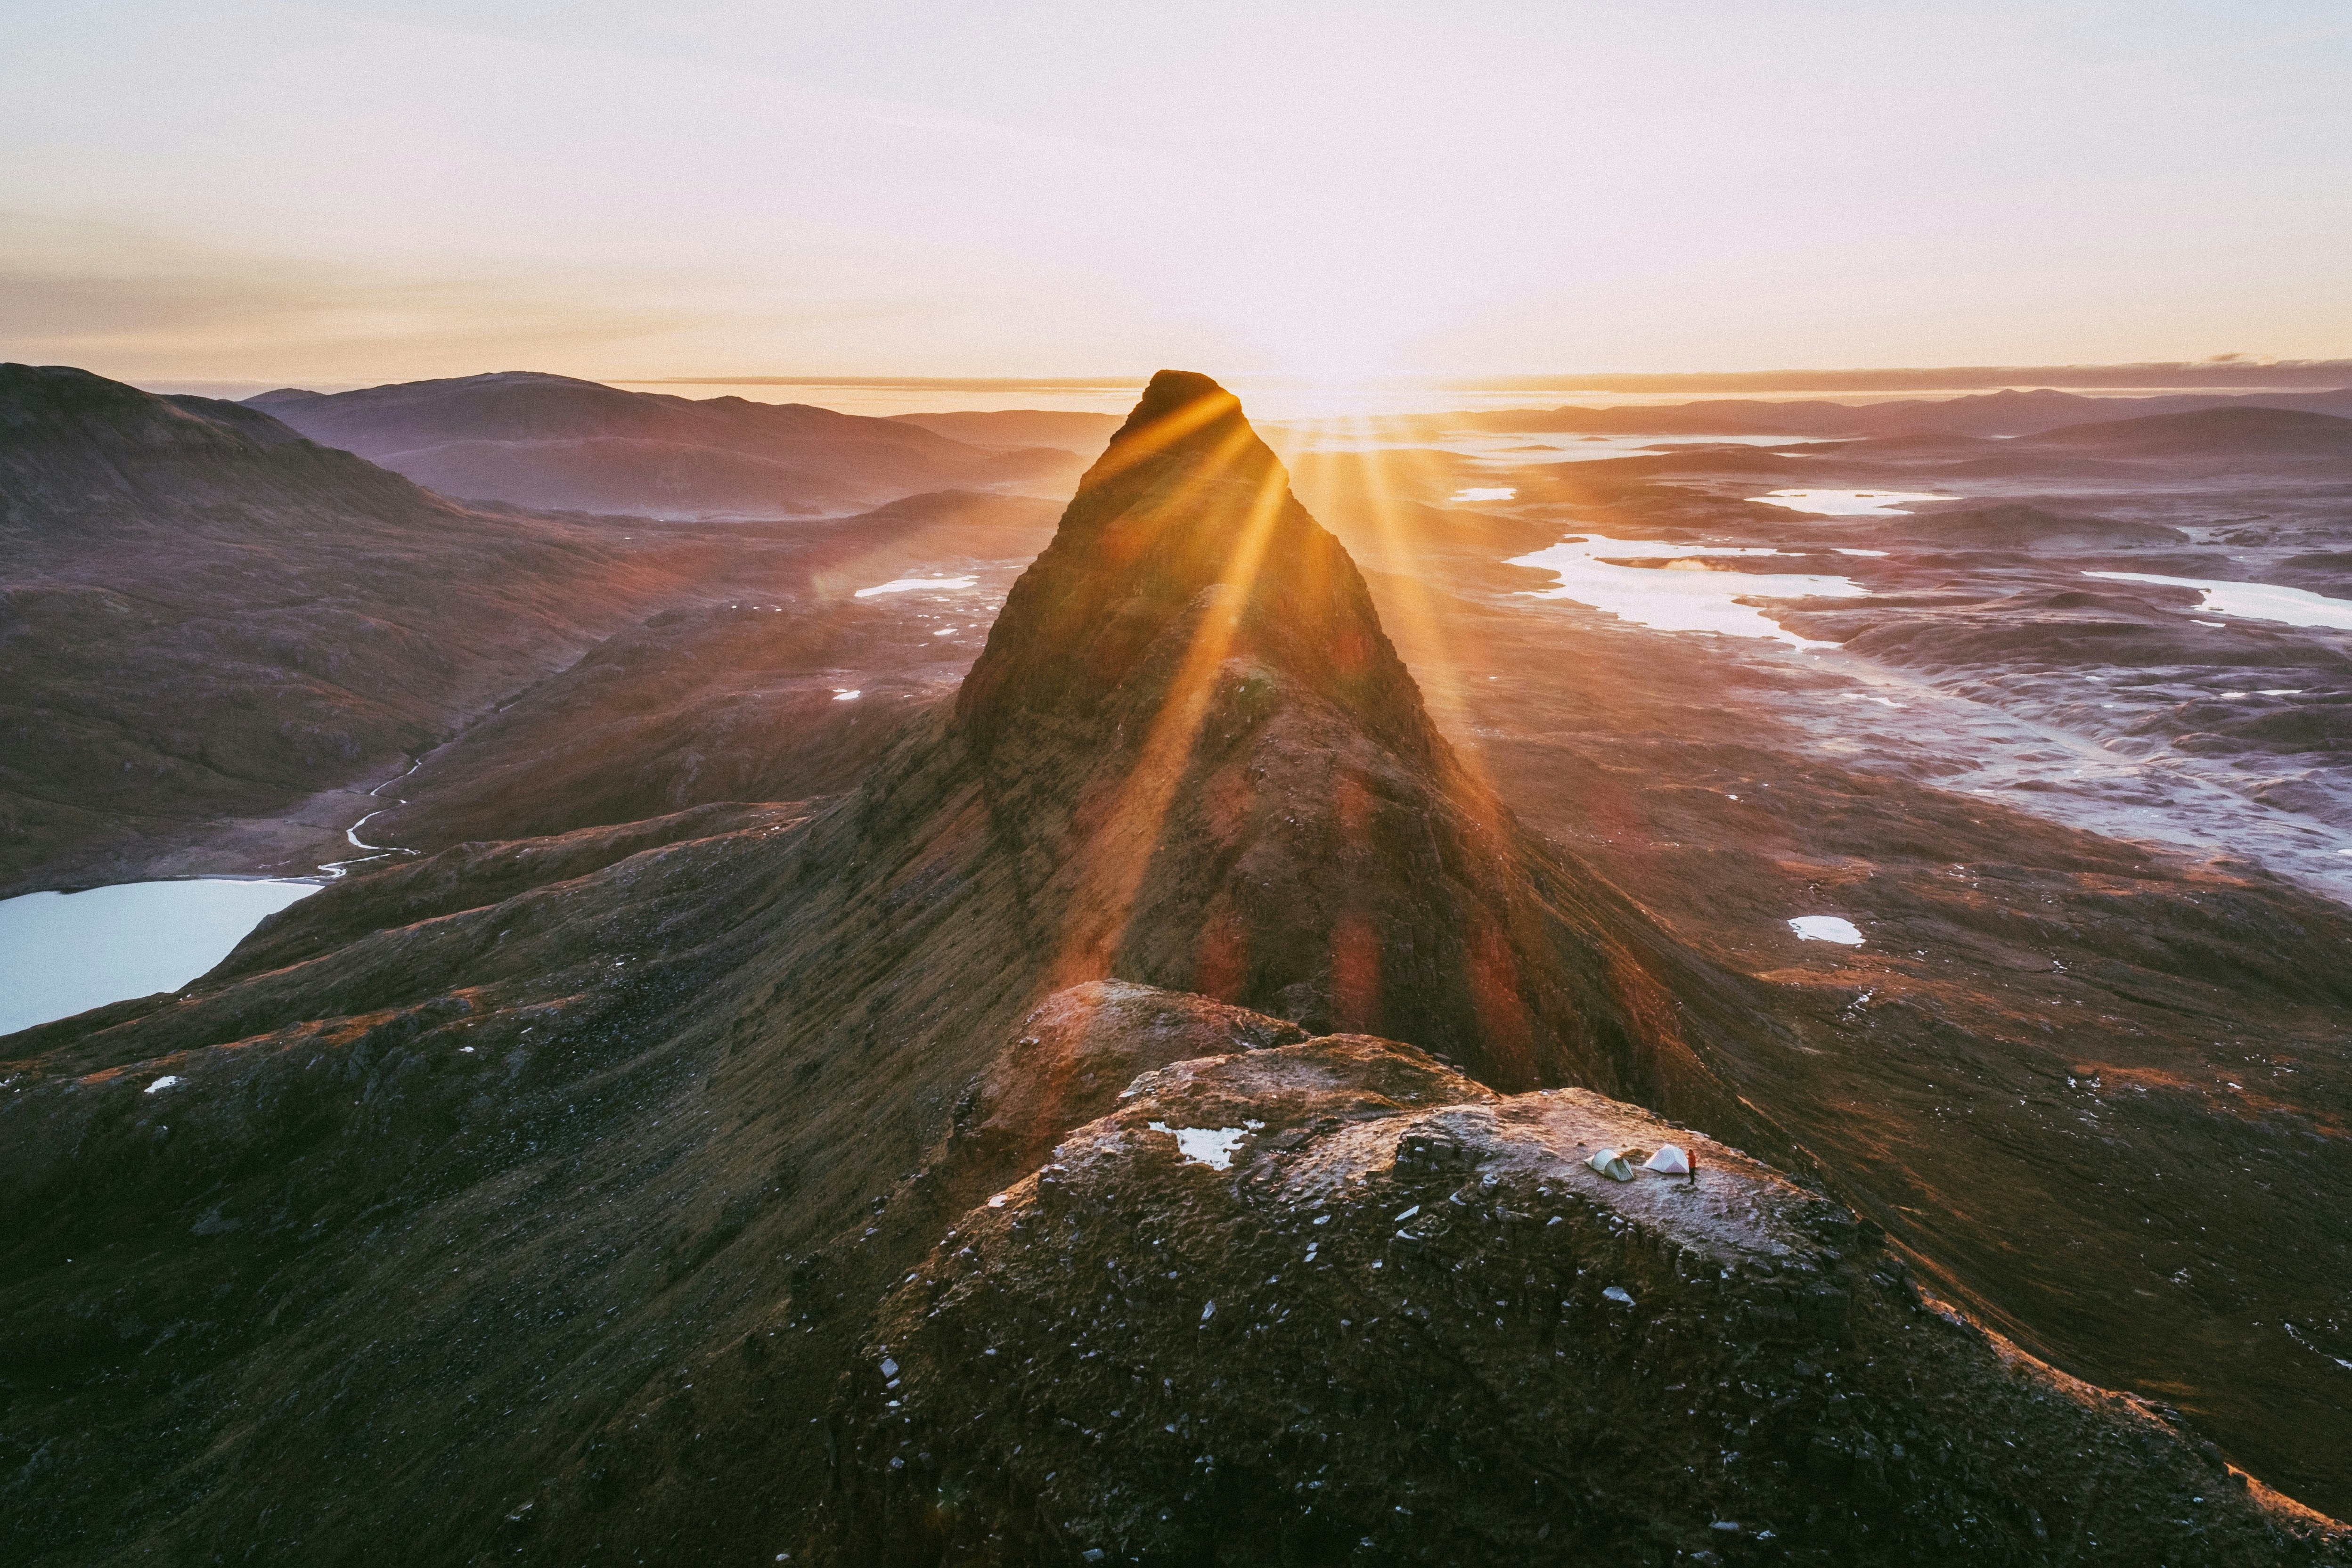 A view over the ridge of Suilven mountain at sunrise.